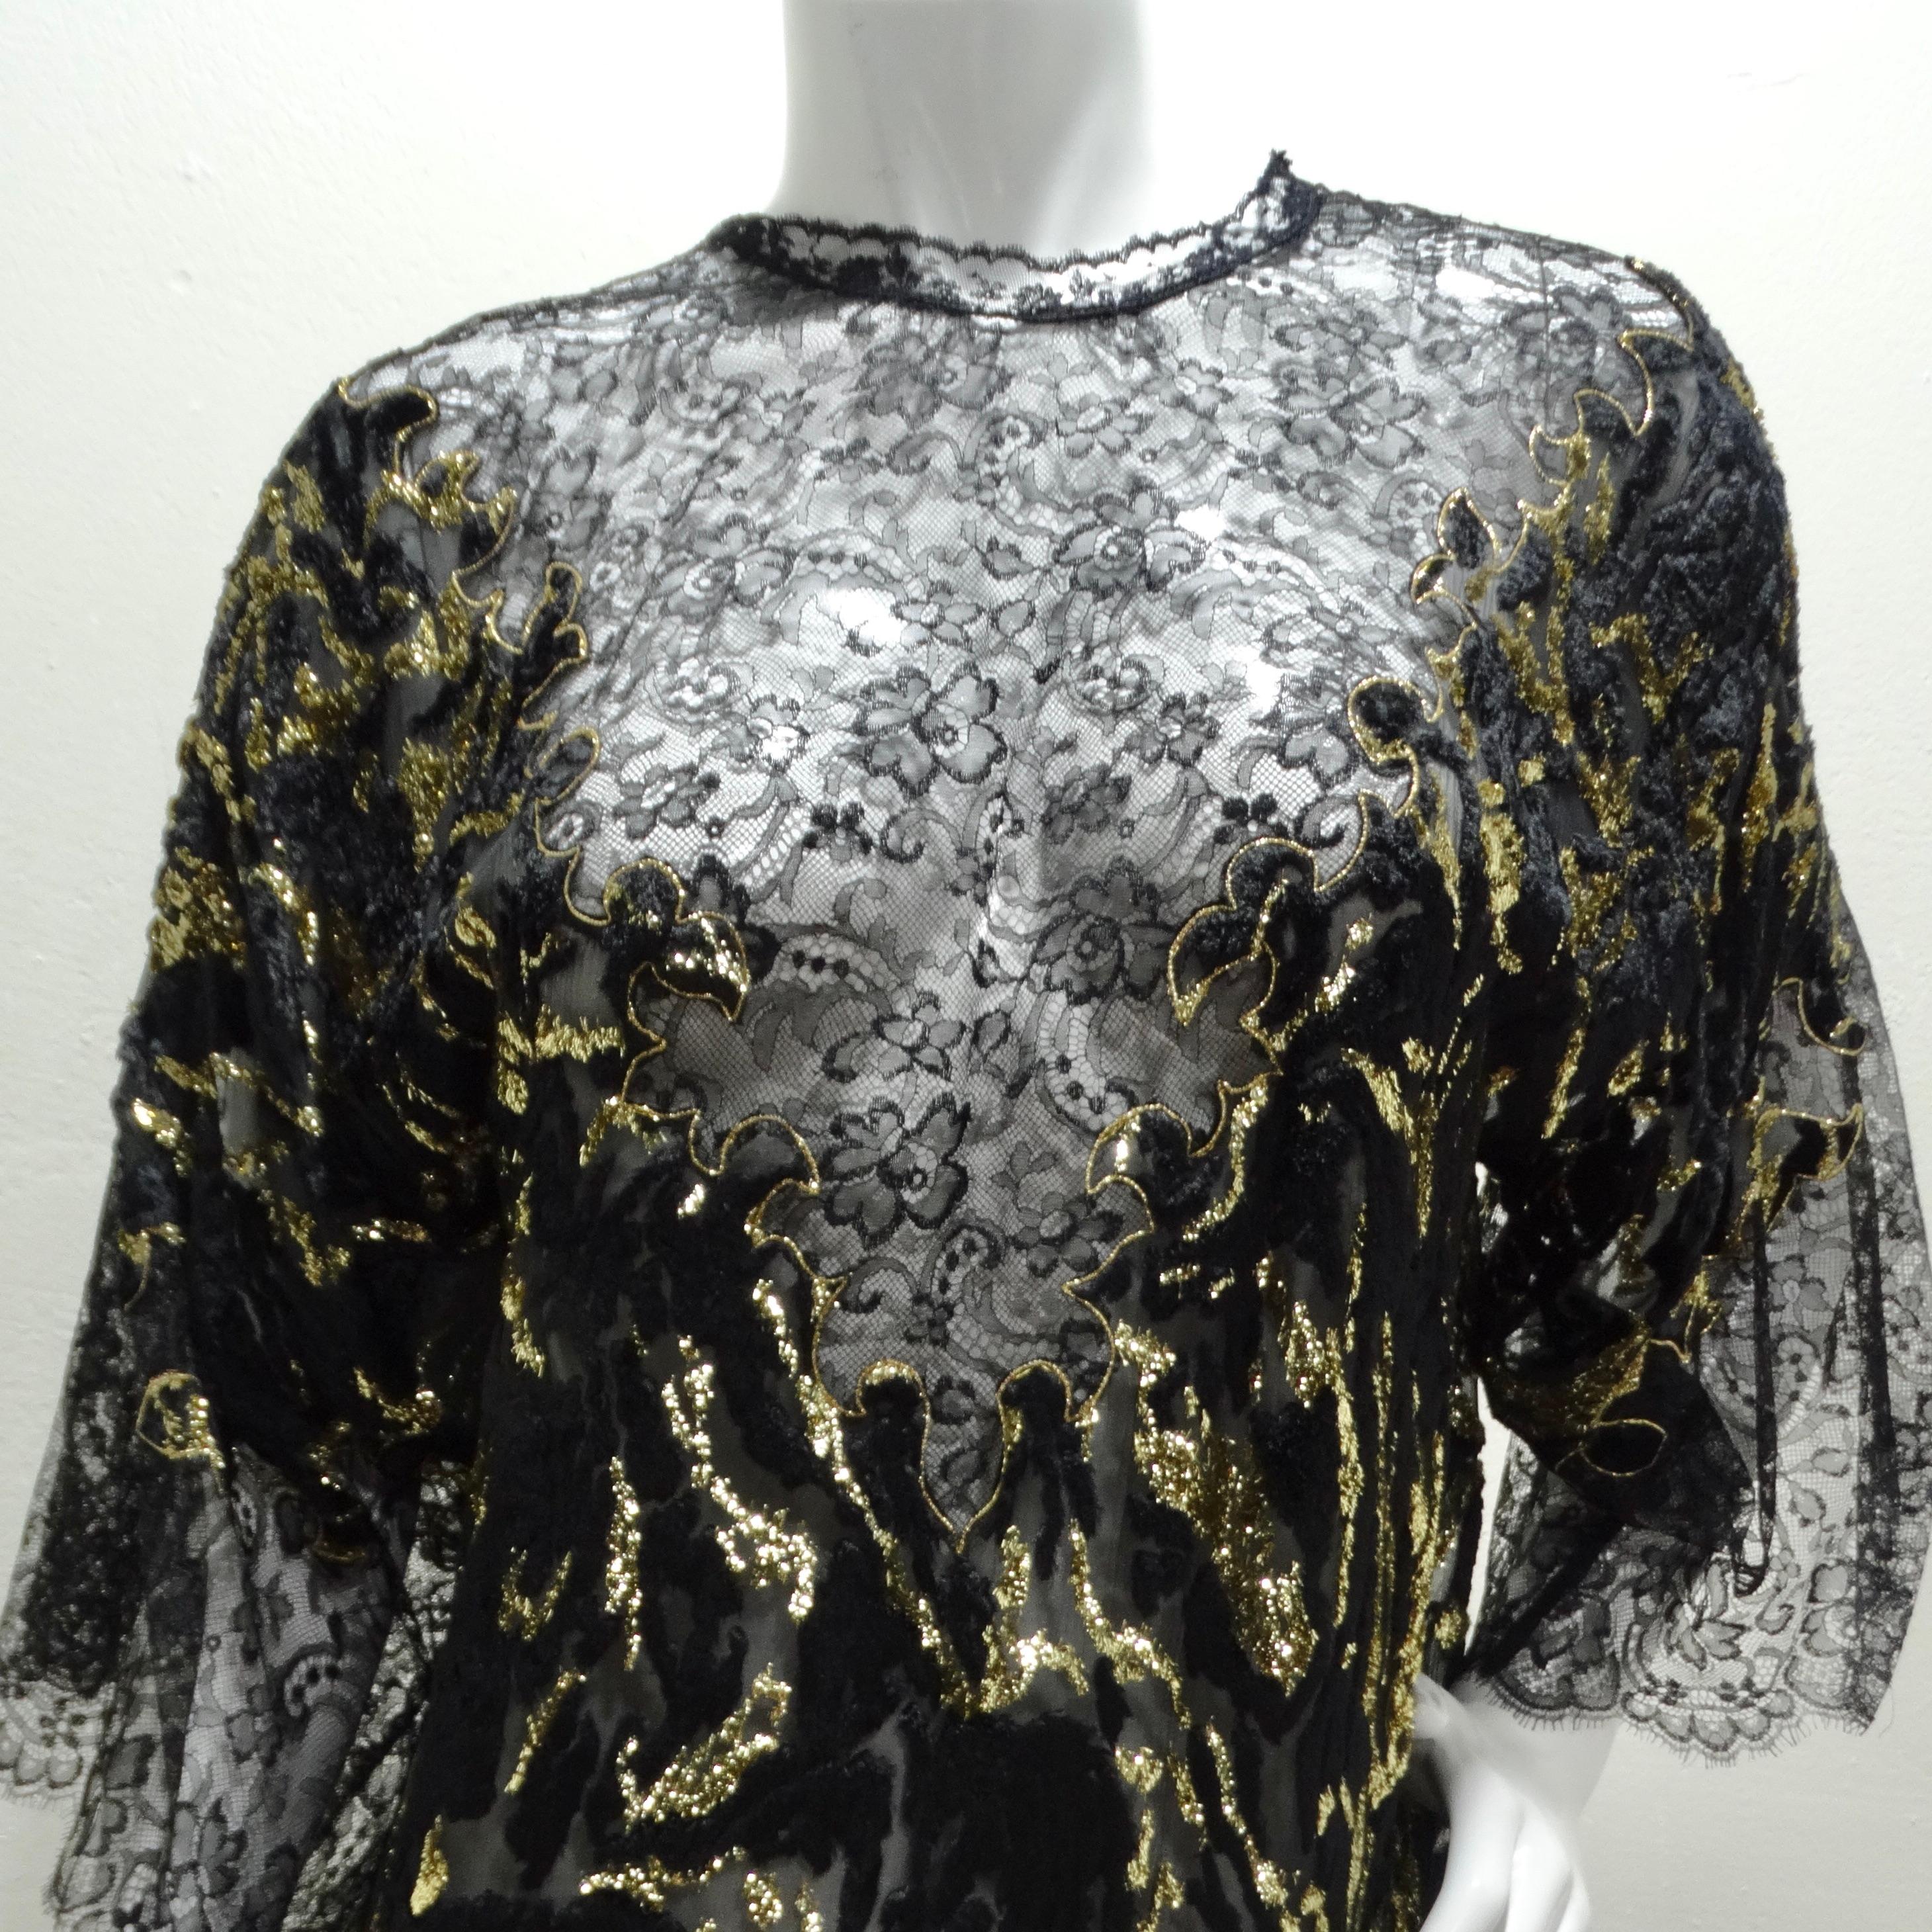 Illuminate the Night with the 1980s Black Metallic Gold Velvet Lace Dress! The dress is crafted from a unique black velvet lace fabric, adding a touch of sophistication and texture to the overall design. The black hue enhances the richness of the